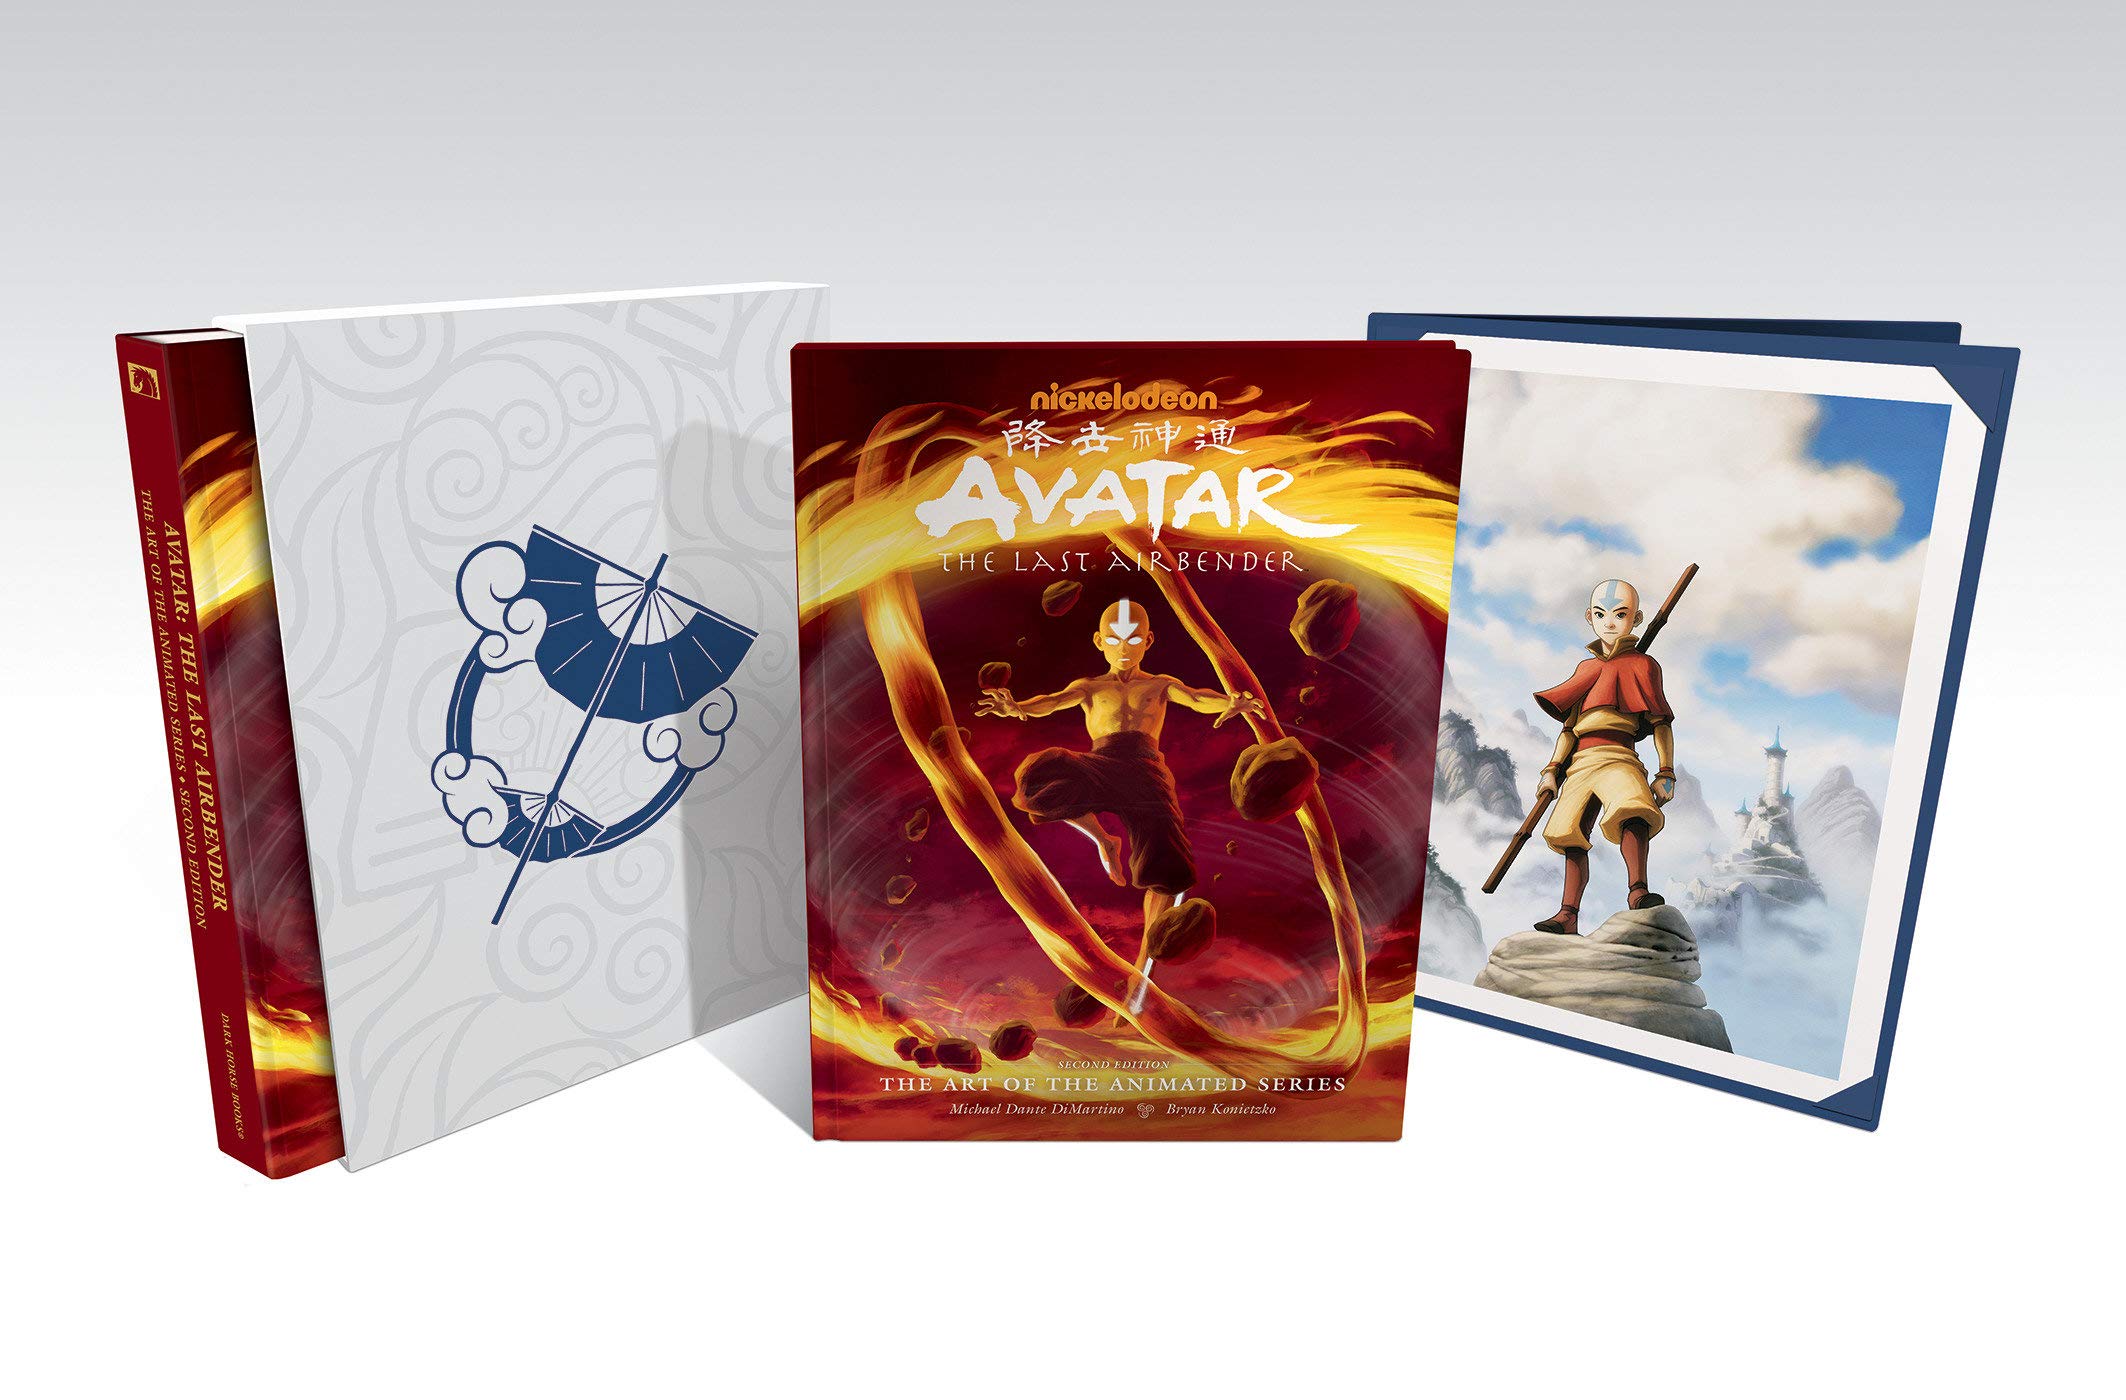 Livro Avatar The Last Airbender the Art of the Animated Series book flip   YouTube